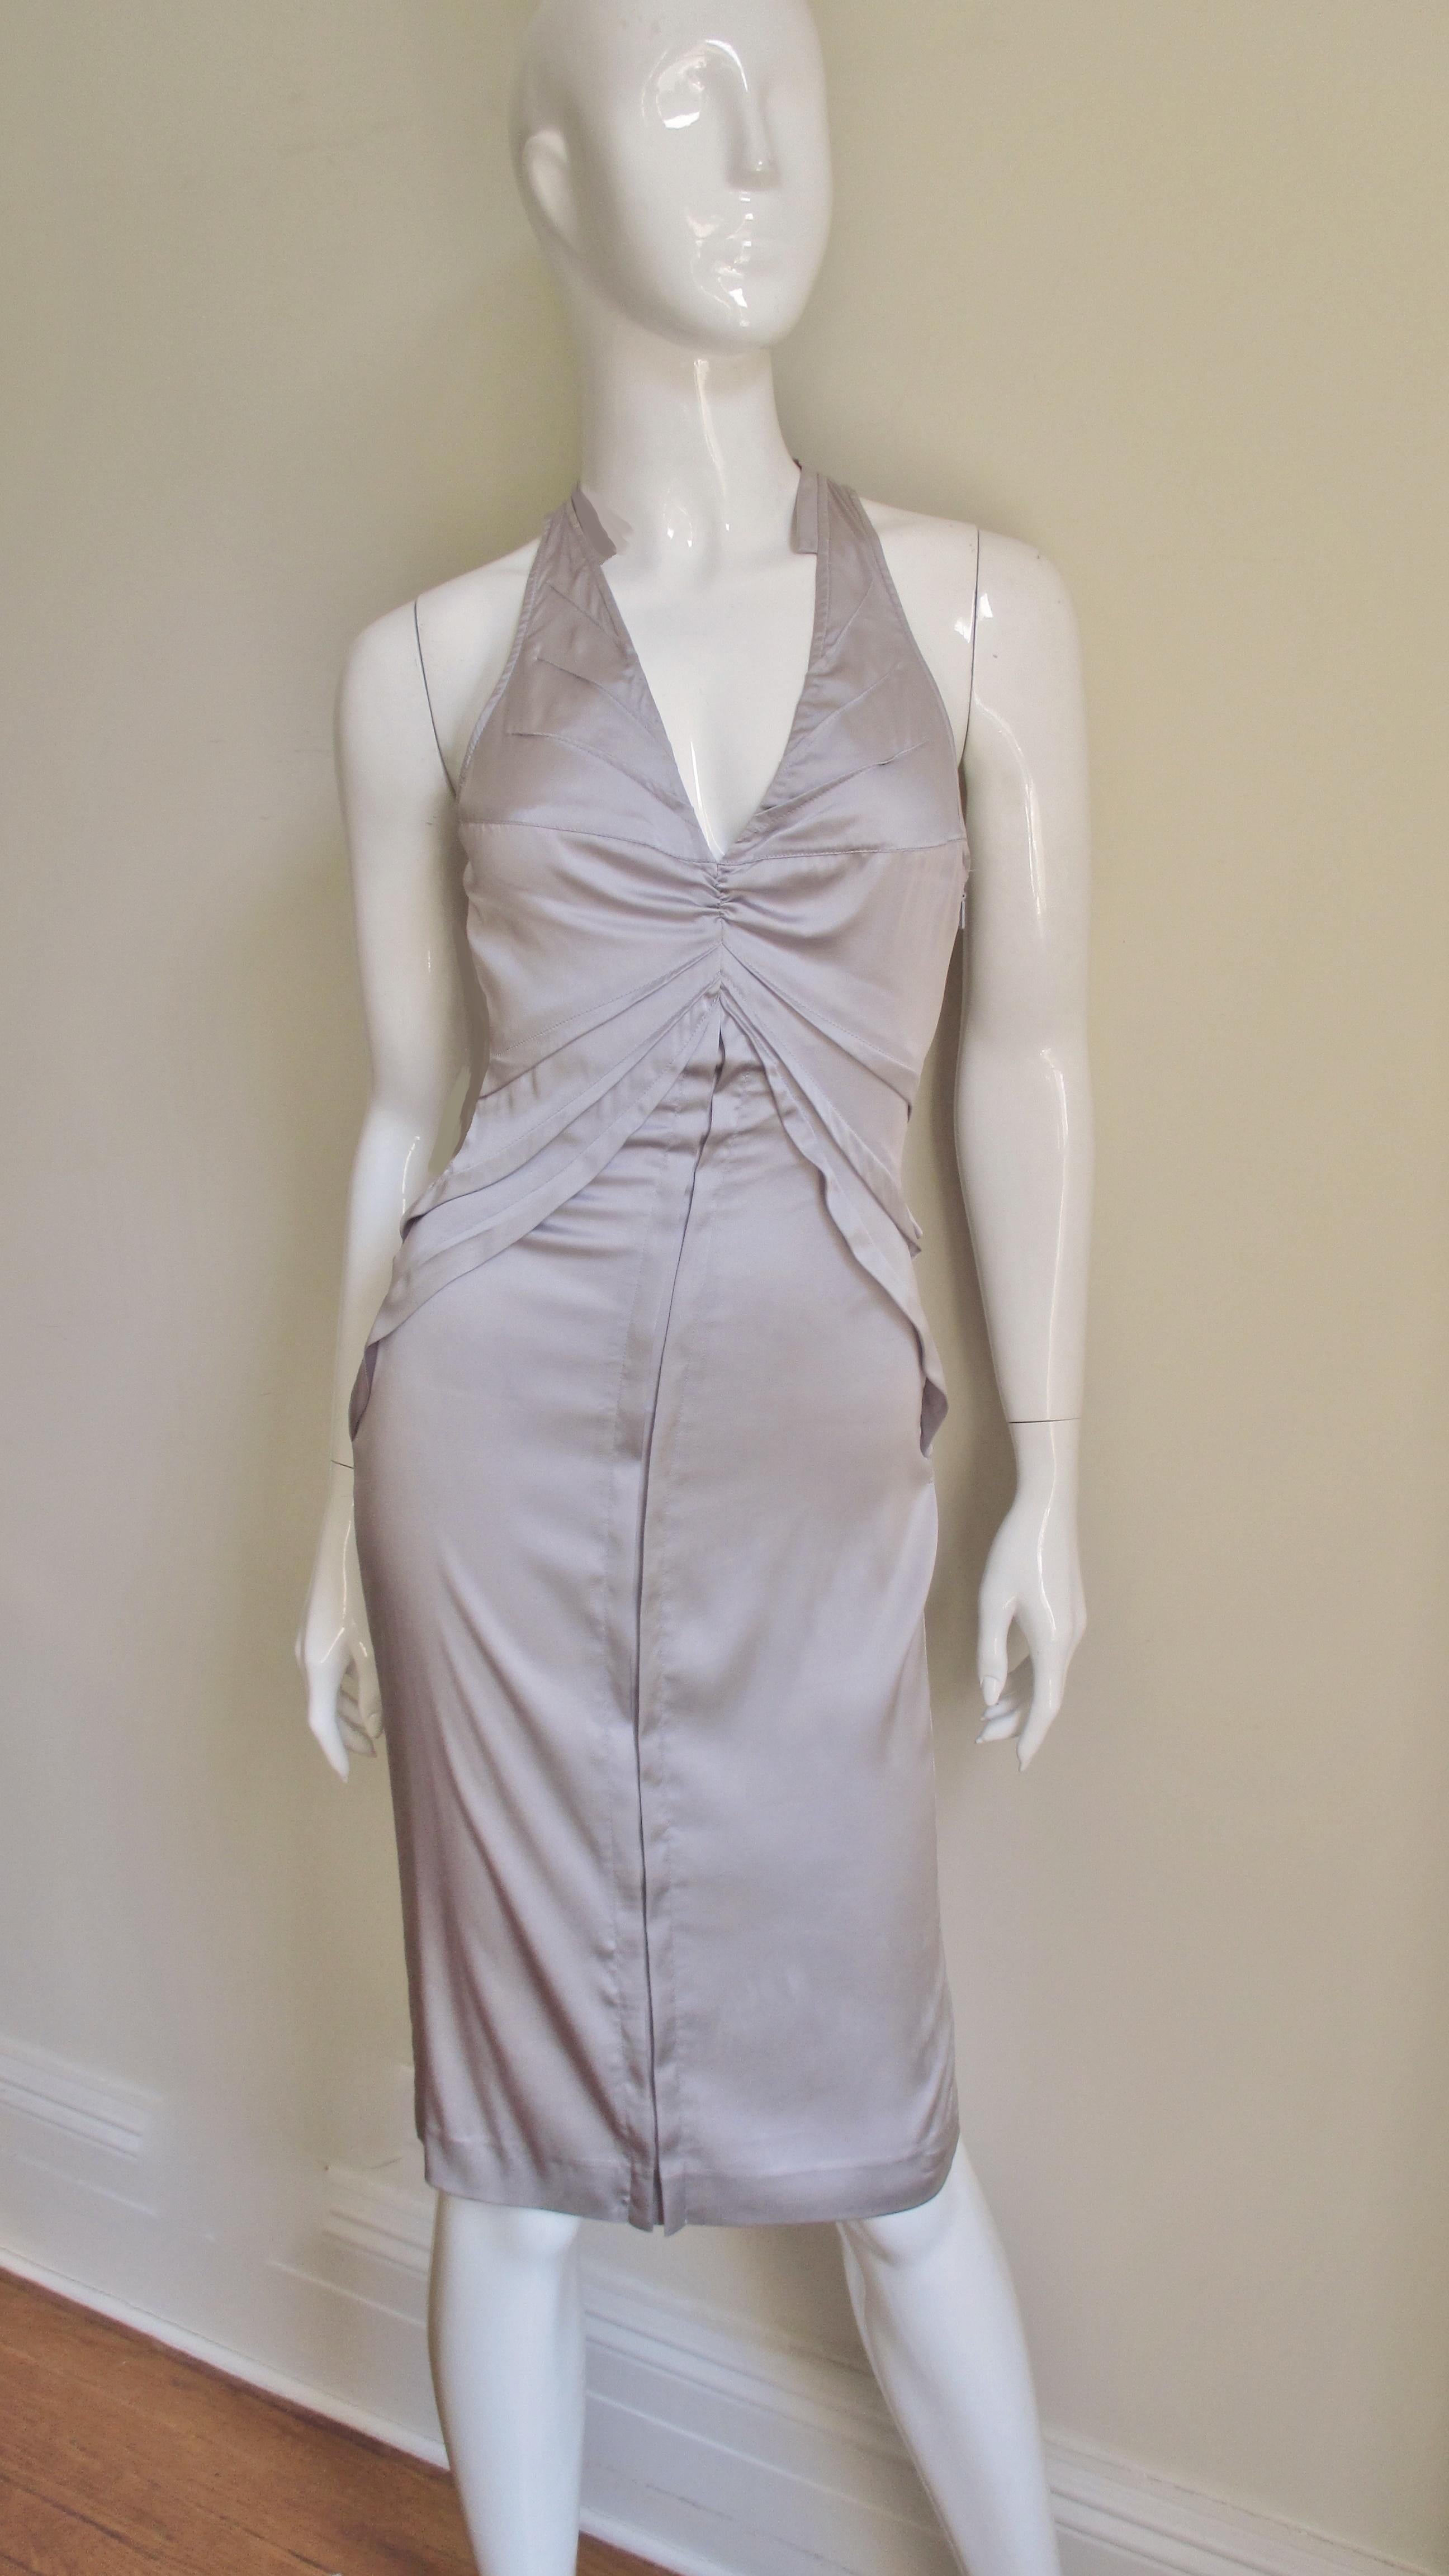 A fabulous lavender stretch silk dress by Tom Ford for Gucci S/S 2003 collection.  It has a plunging front neckline and racer back with multiple seams emanating from it and the side seams drawing in the waist.  It has a straight skirt with a slit at